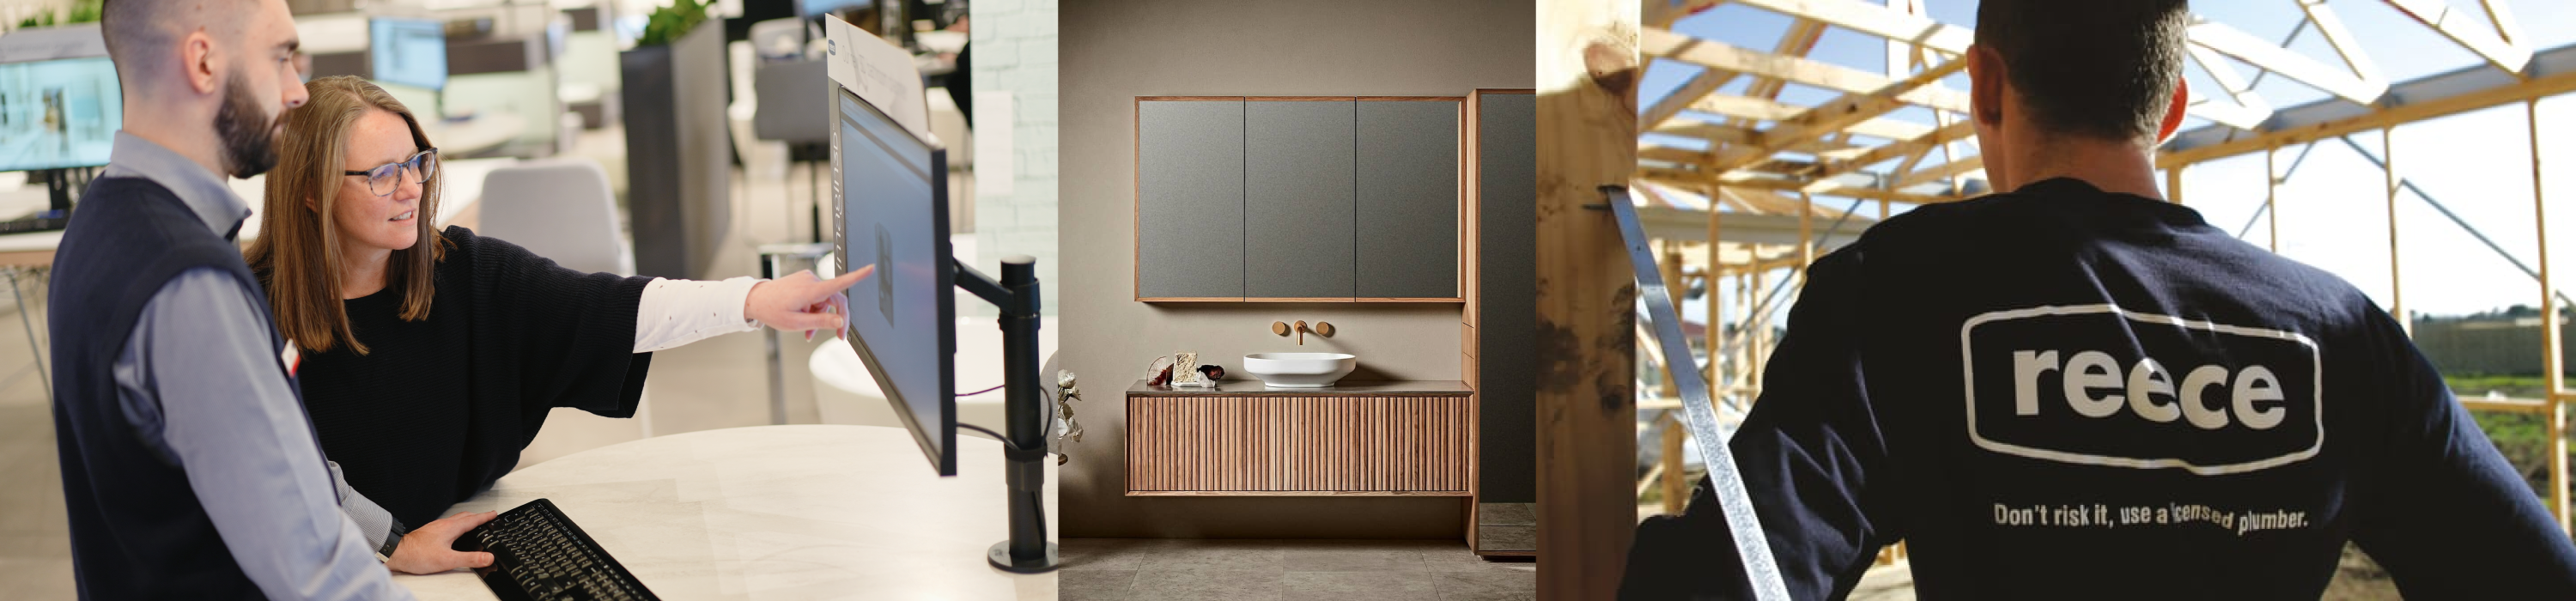 Banner with three images: image on left shows a women pointing at a computer screen next to a Reece showroom consultant; image in the middle is of a modern wooden bathroom washstand, image on the right is of the back of a man wearing a shirt with the Reece logo.